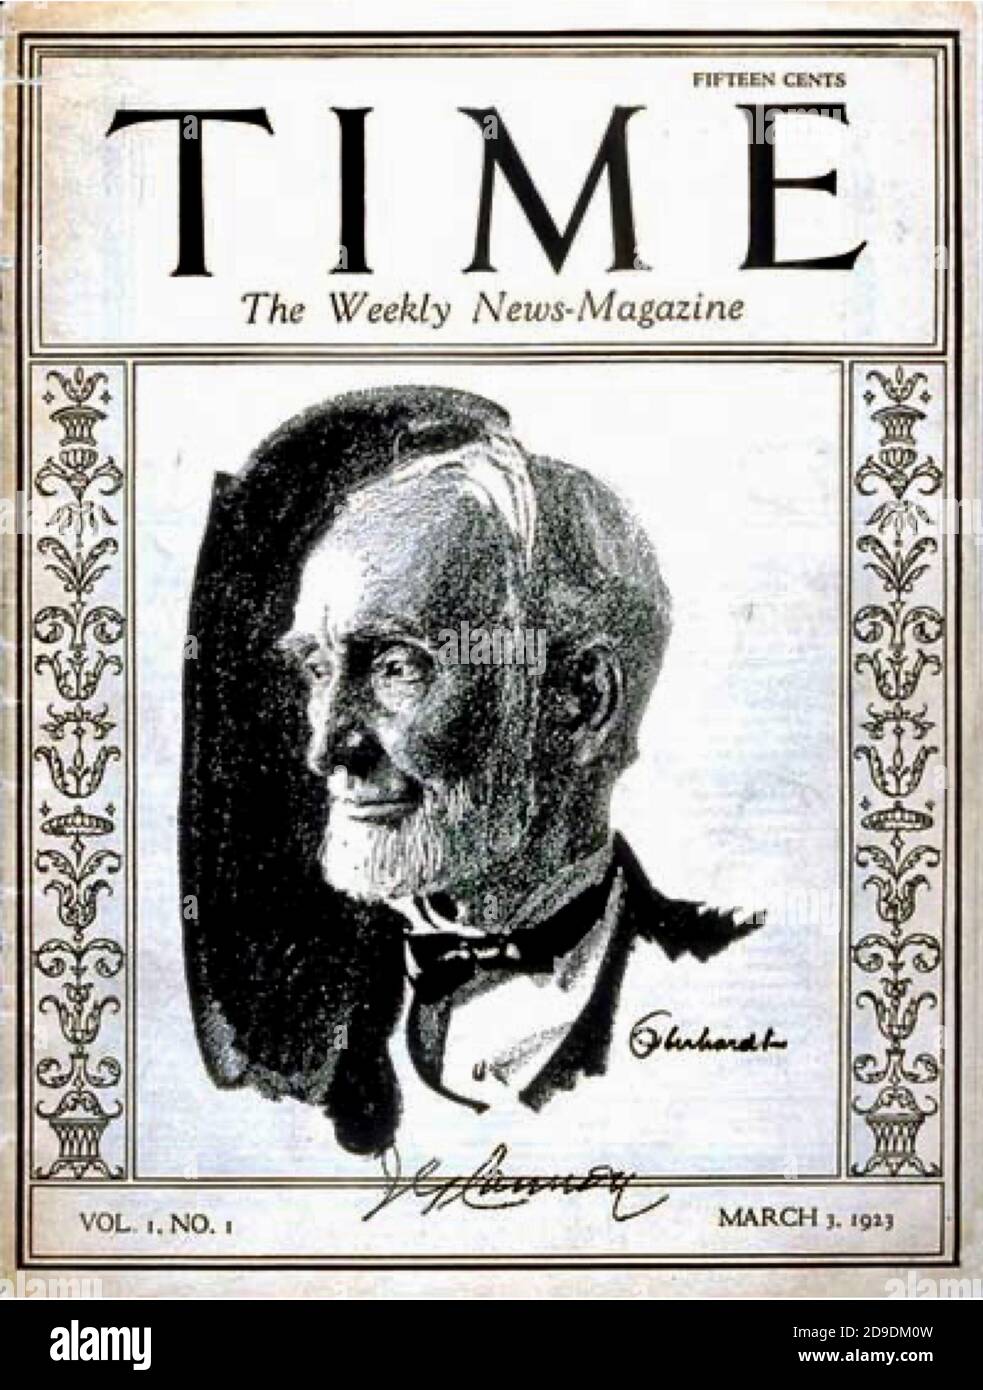 Time magazine, Volume 1 Issue 1, March 3, 1923 The cover shows the Speaker of the United States House of Representatives - Joseph G Cannon Stock Photo